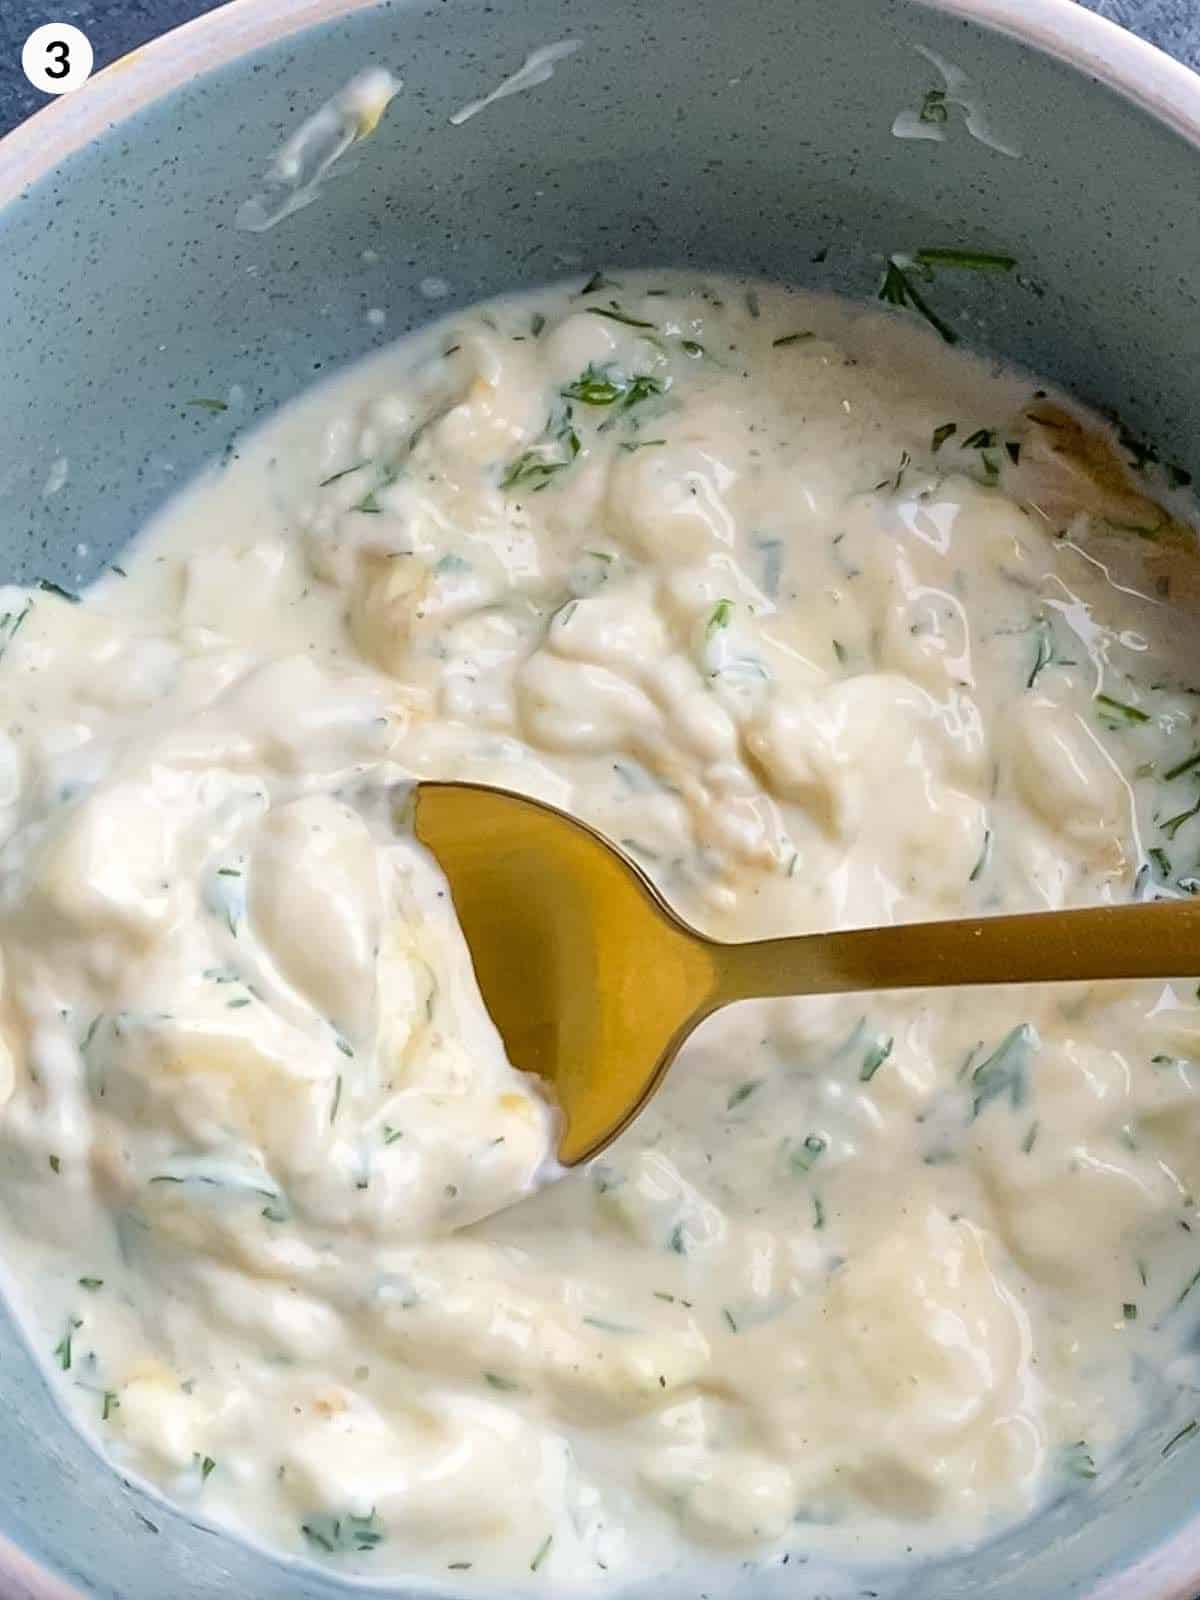 a gold spoon scooping out some creamy salad dressing with dill from a blue bowl